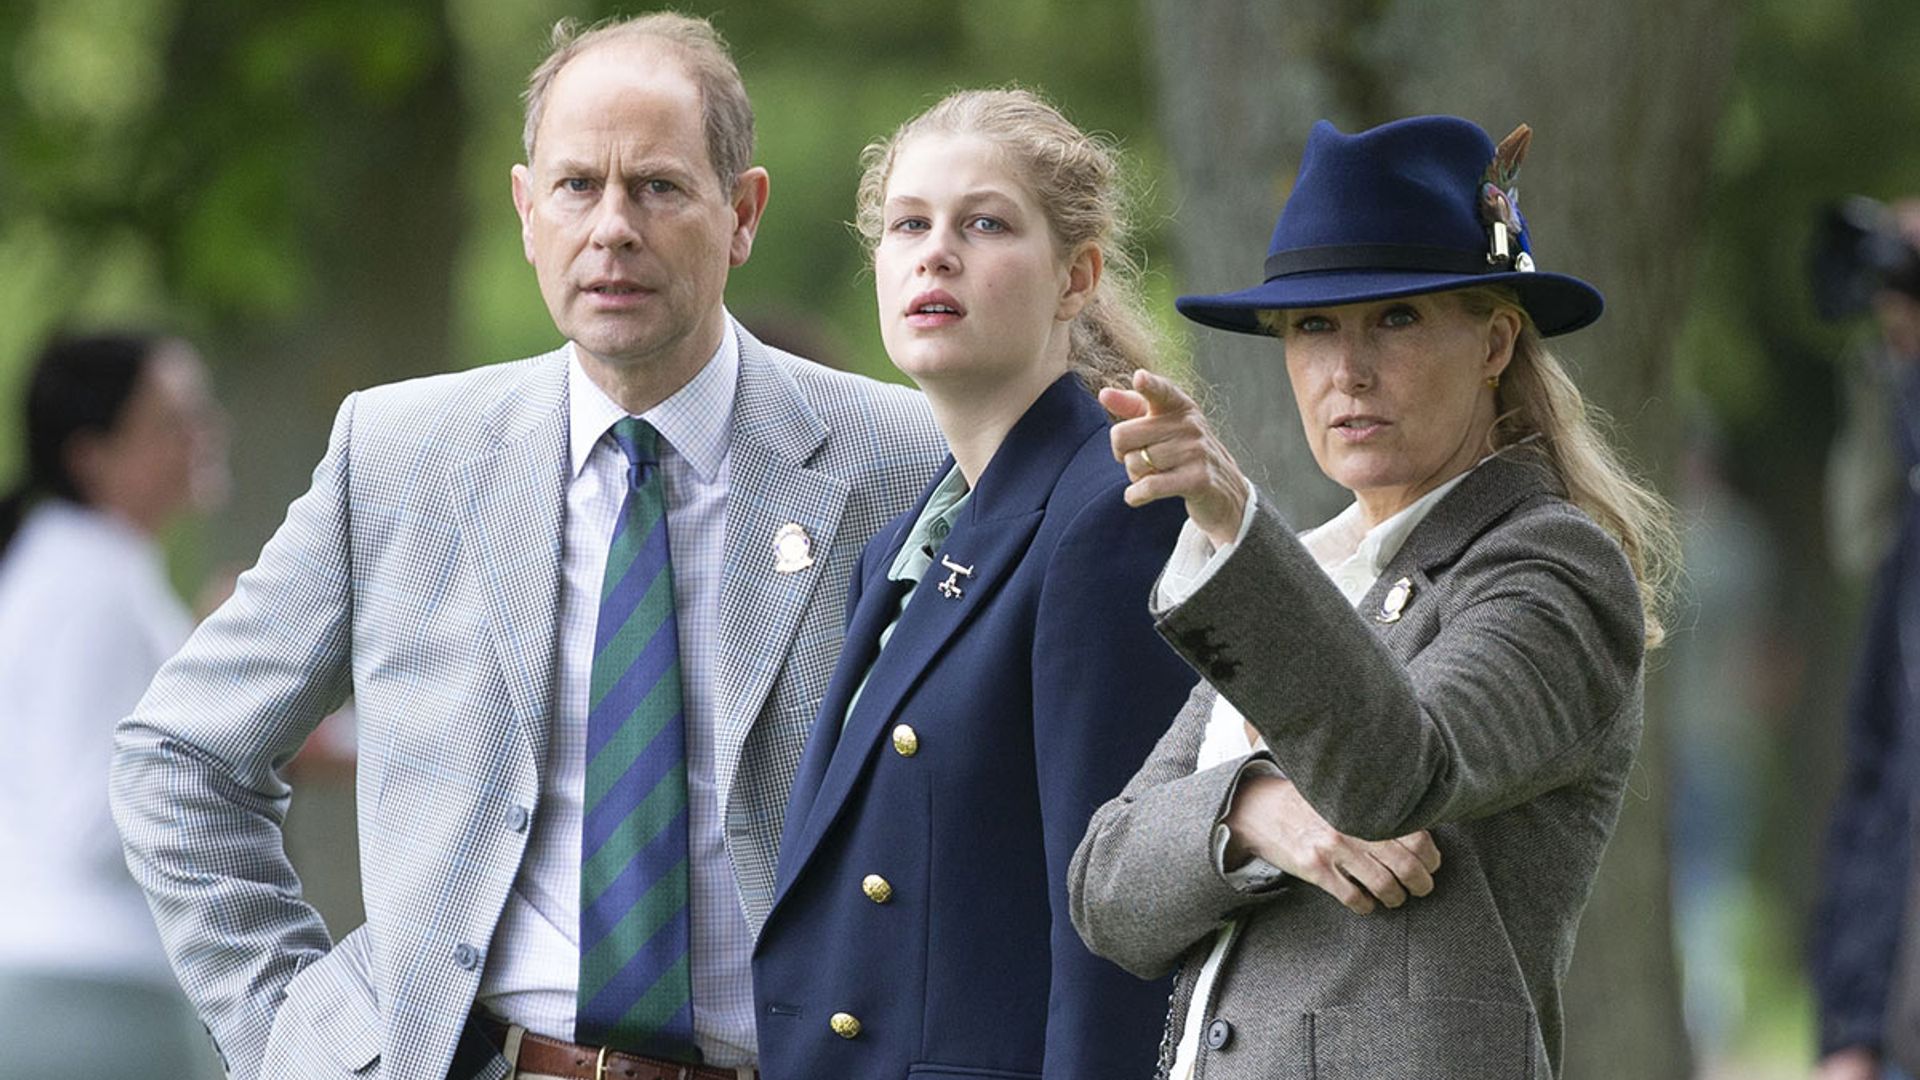 Prince Edward and Sophie Wessex enjoy family day out at Royal Windsor Horse Show - see photos